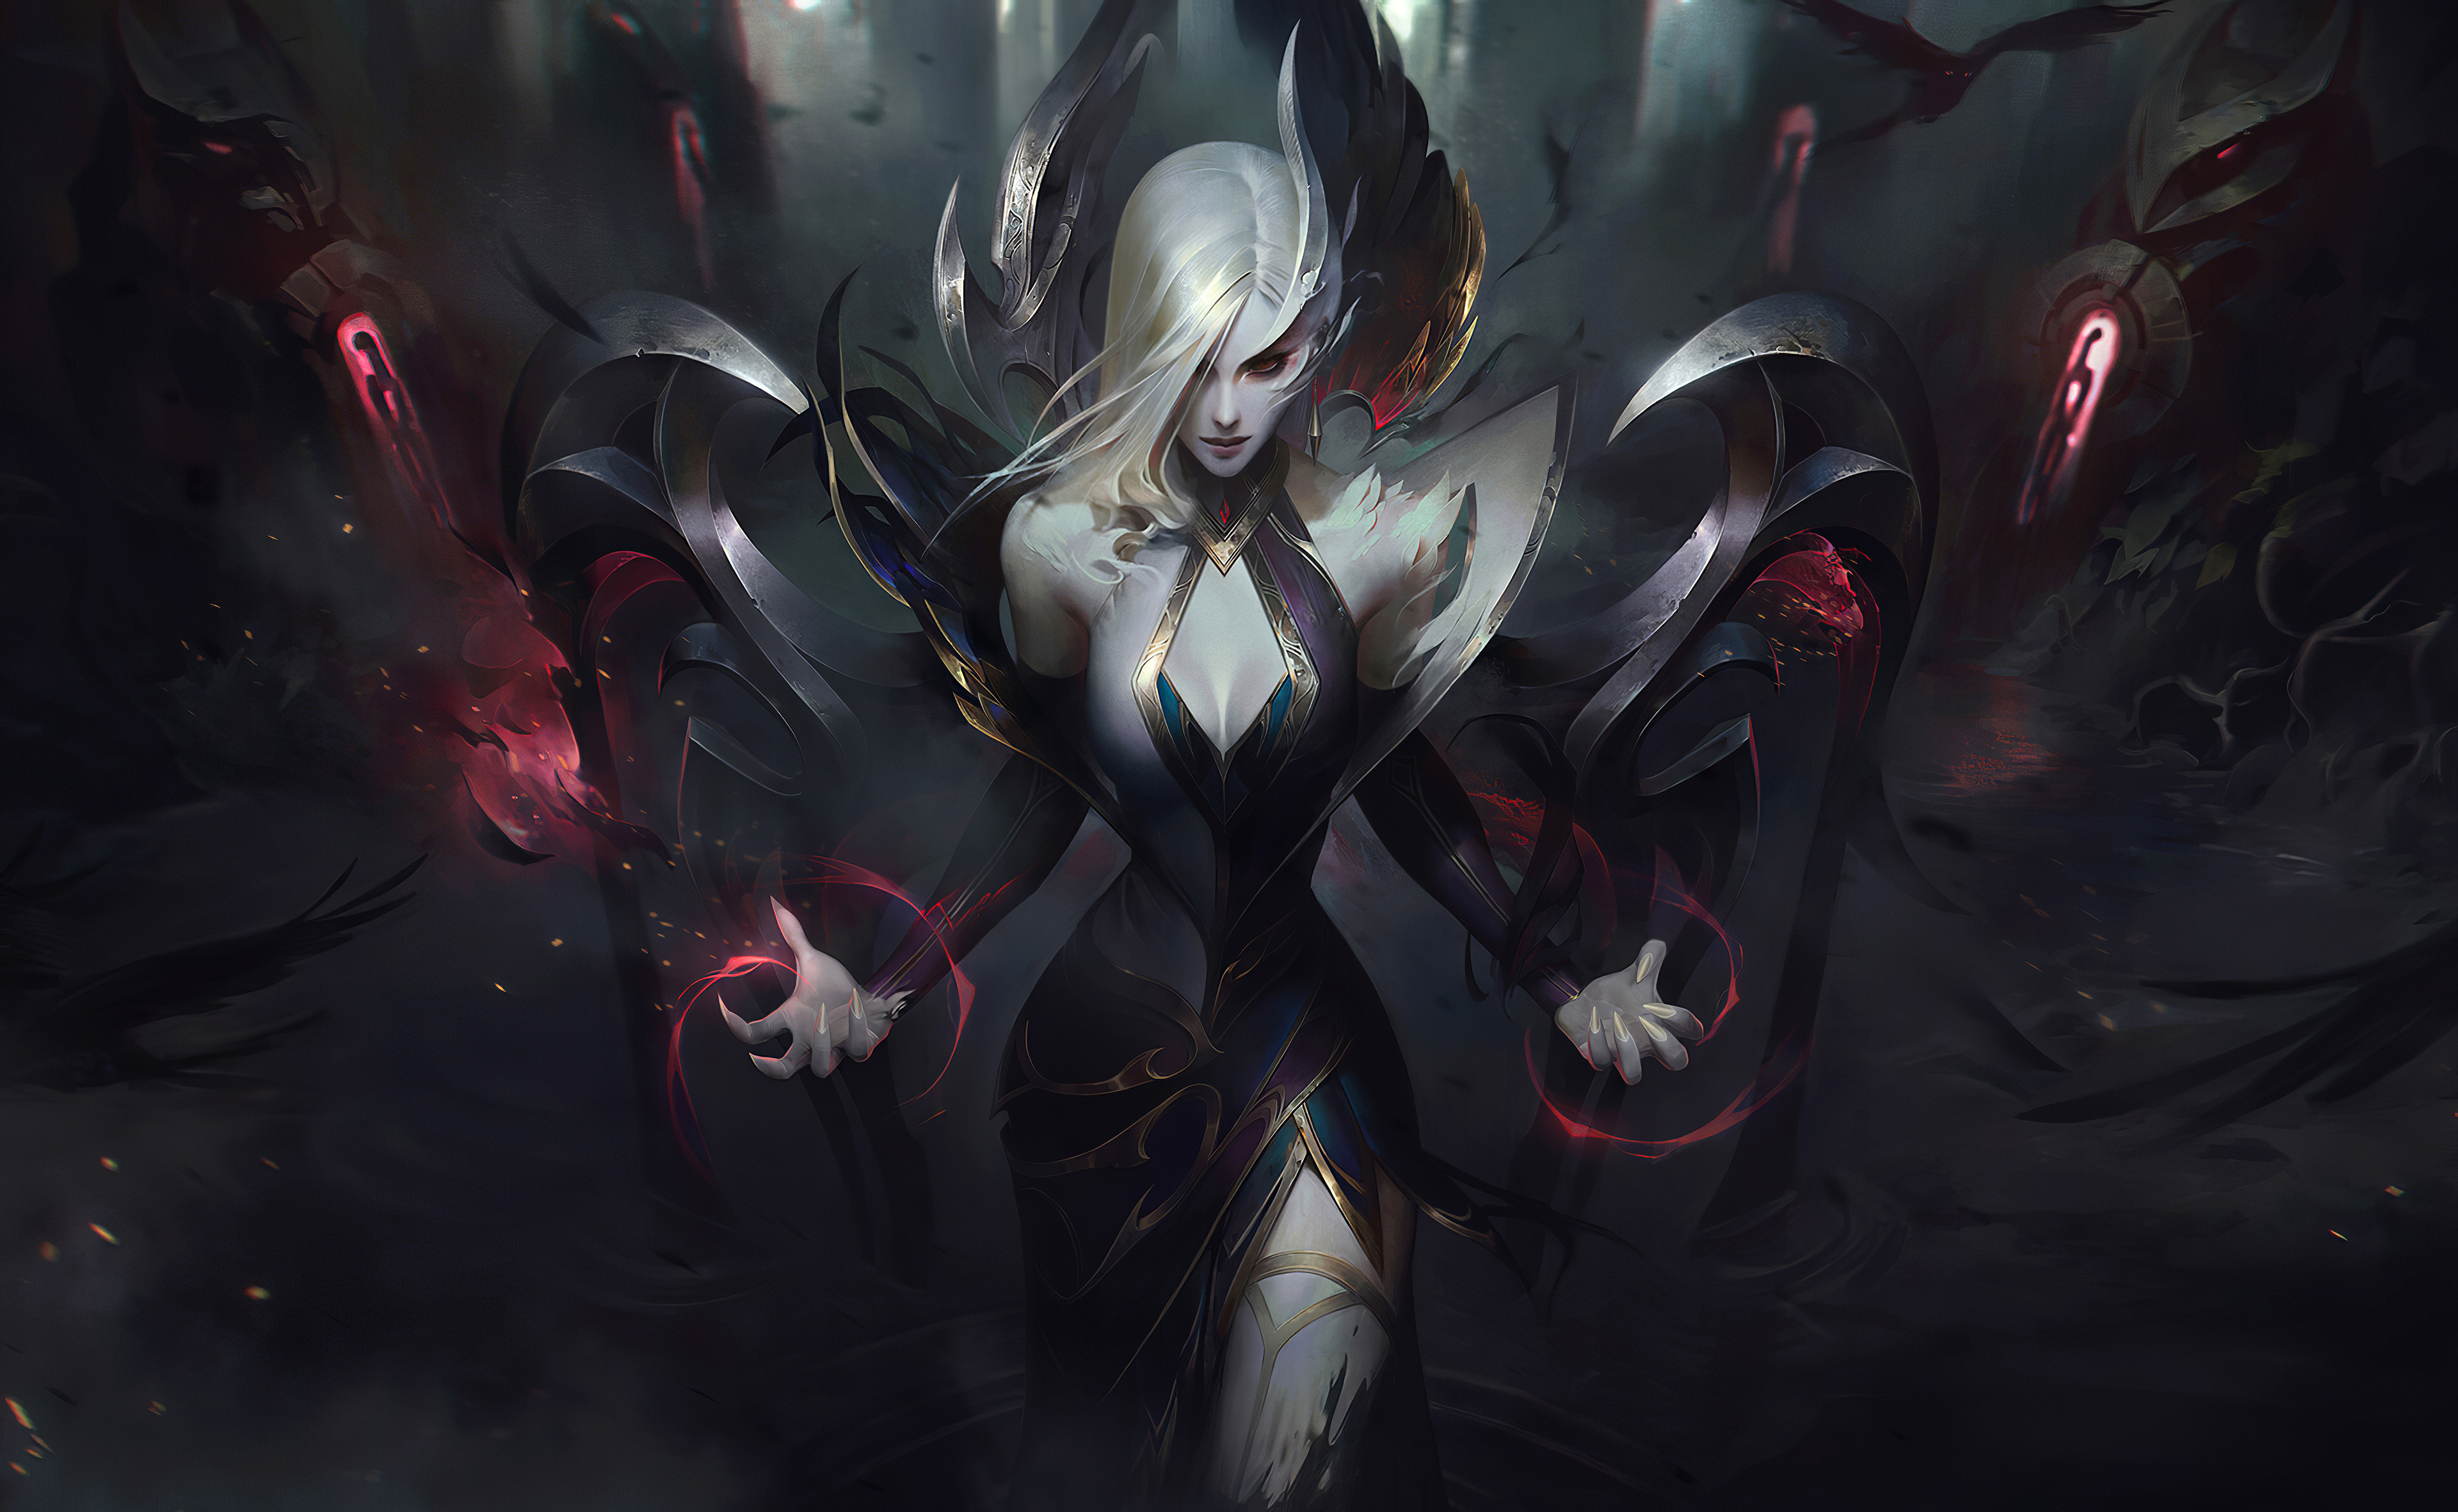 coven morgana league of legends 4k hd games 4k wallpapers images backgrounds photos and pictures coven morgana league of legends 4k hd